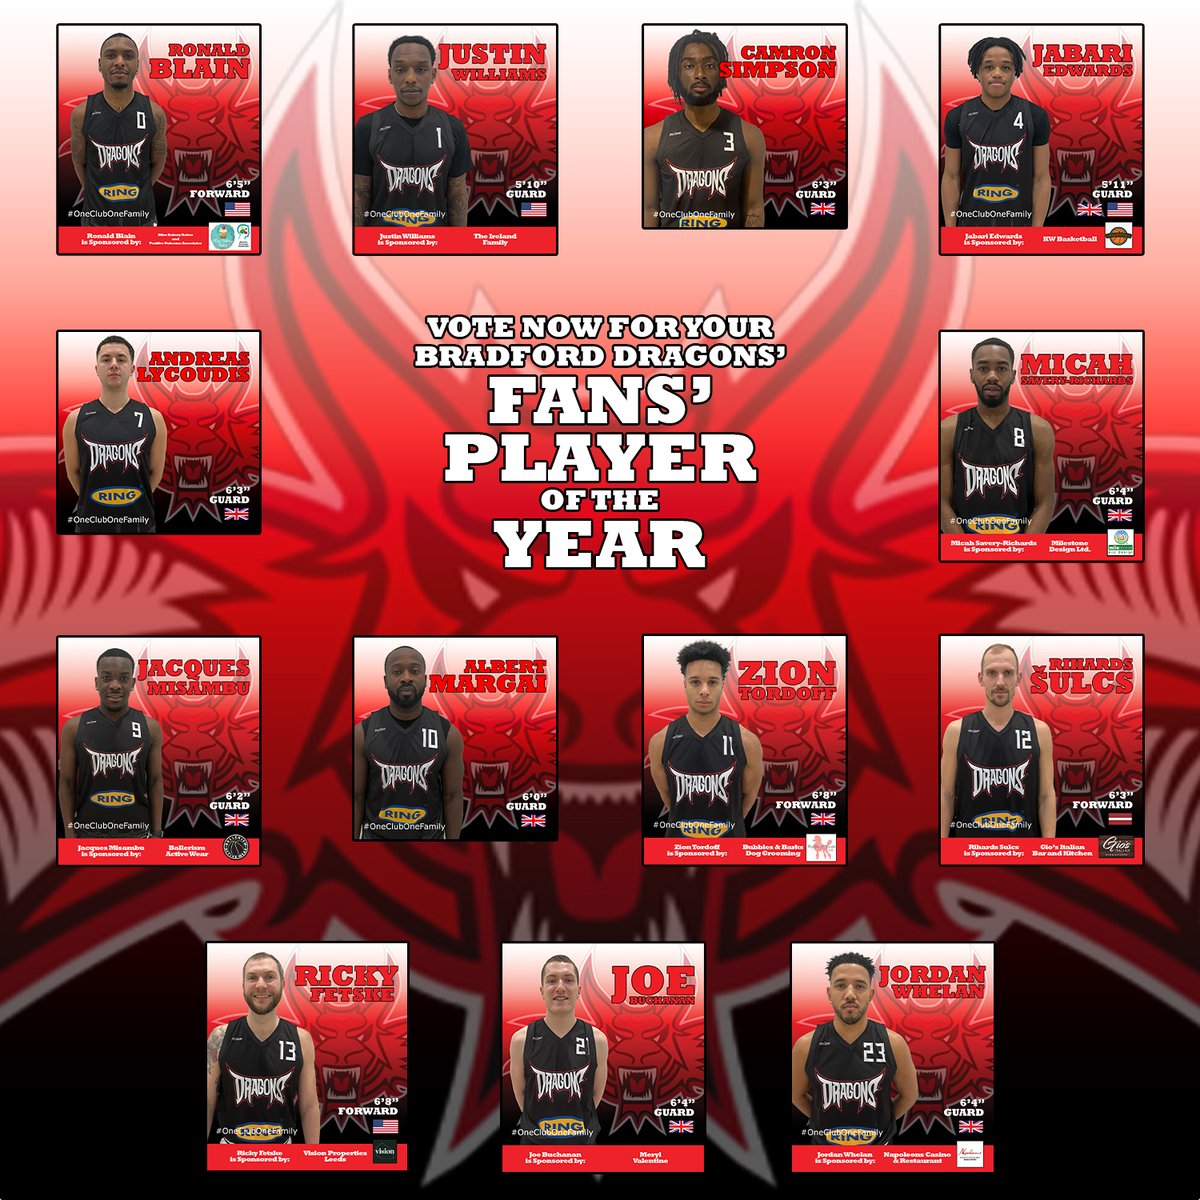 Vote for your Bradford Dragons' Fans' Player of the Year. Place your vote at bradforddragons.co.uk/fans-player-of… The vote closes at 9pm on Sunday 7th April. Conditions apply (see website). #BradfordDragons #Basketball #OneClubOneFamily #EndOfSeasonAwards #FansPlayerOfTheYear